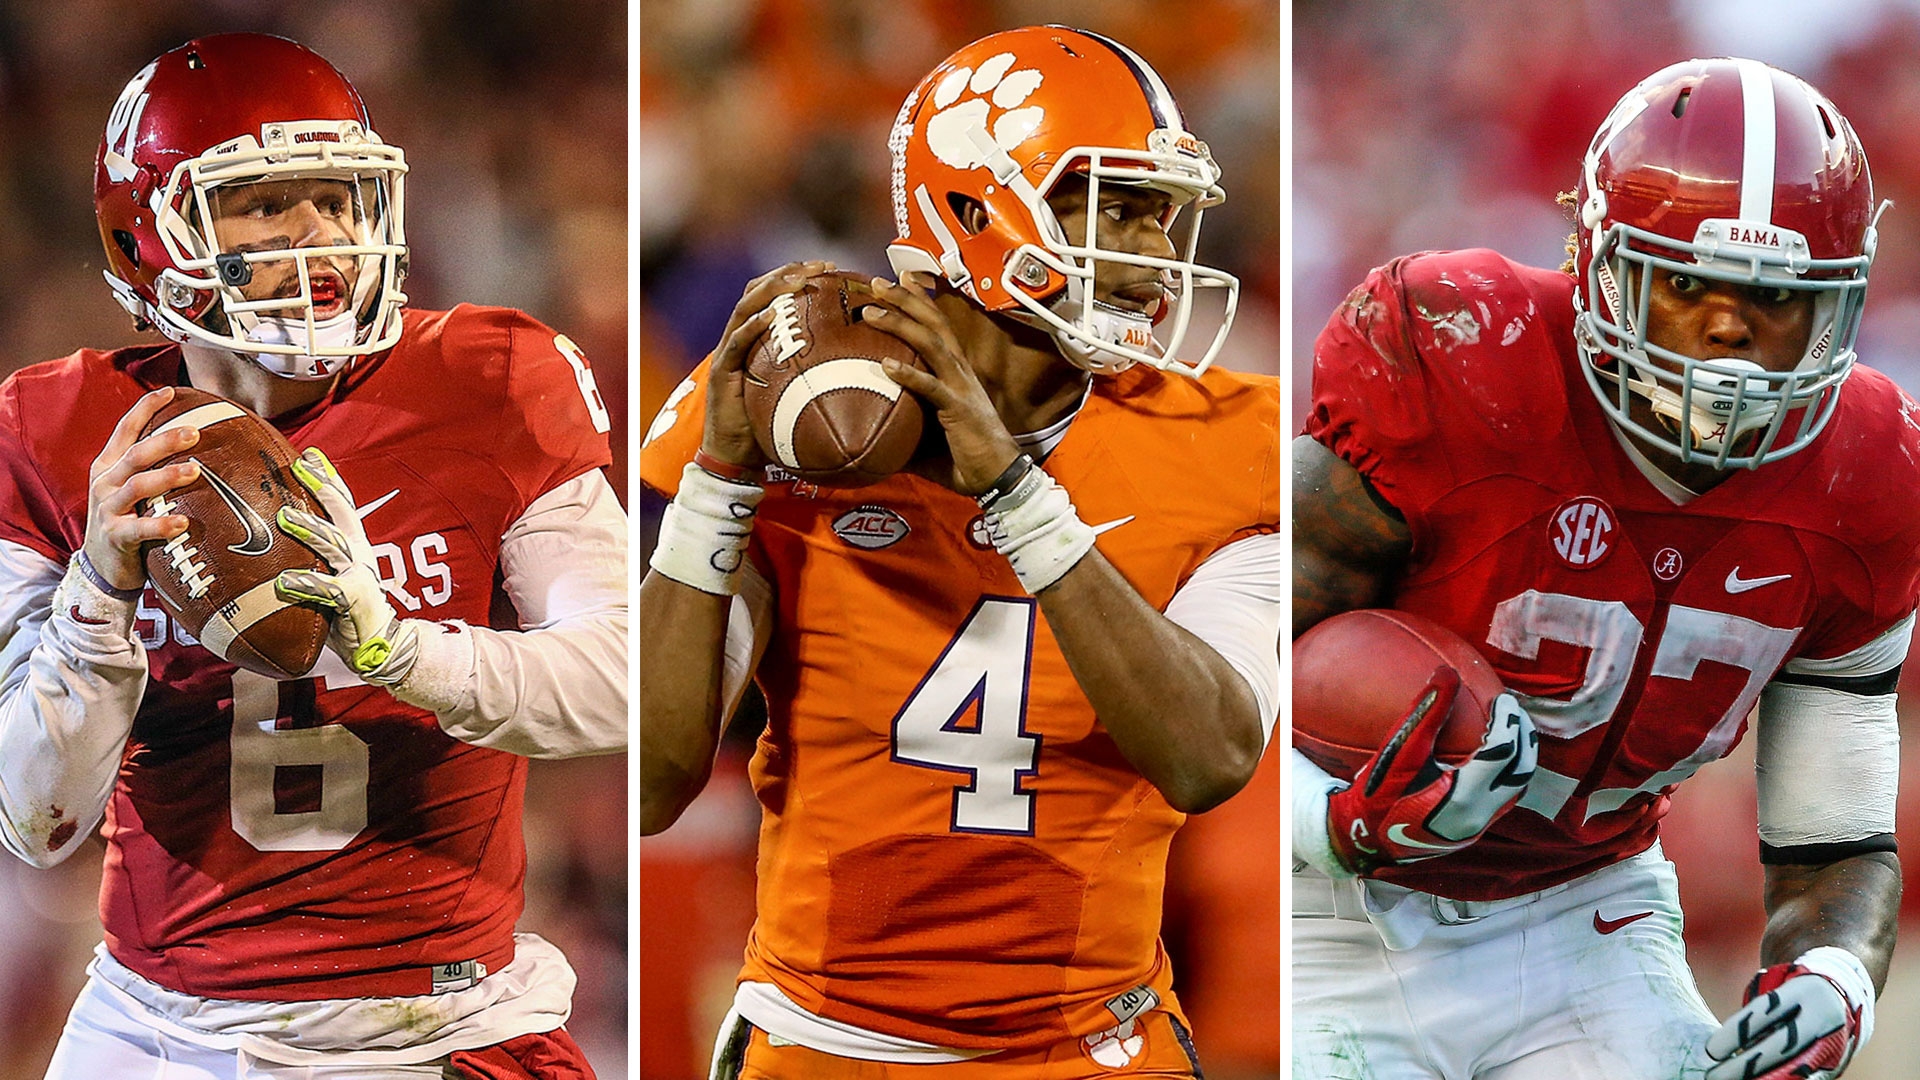 Best of 2015: From Baker Mayfield and Derrick Henry to Clemson and the Hog Heave